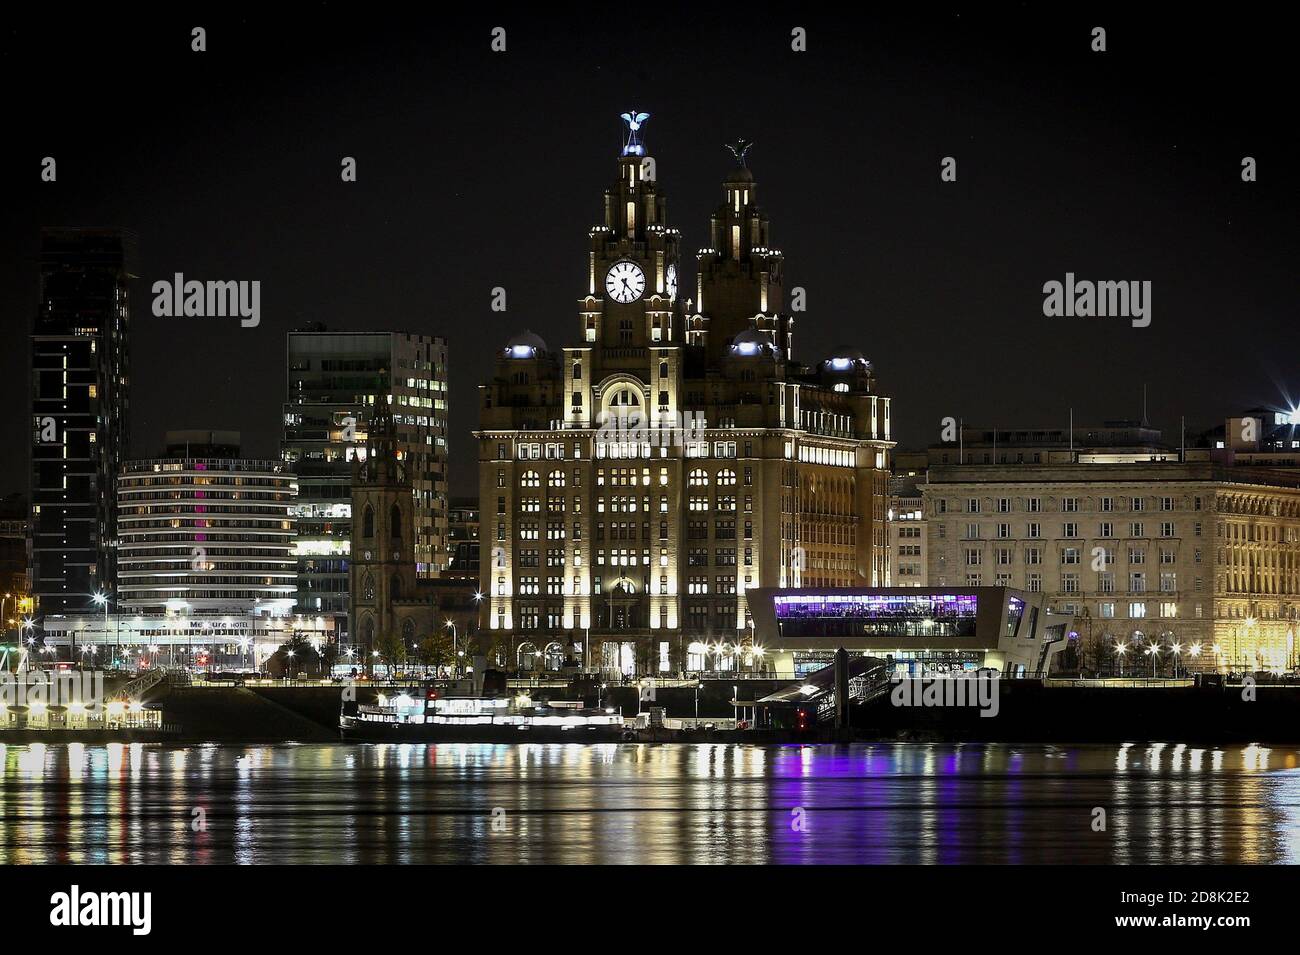 General night time view of the Liverpool waterfront and Liver Building taken from the Wirral side of the river Stock Photo